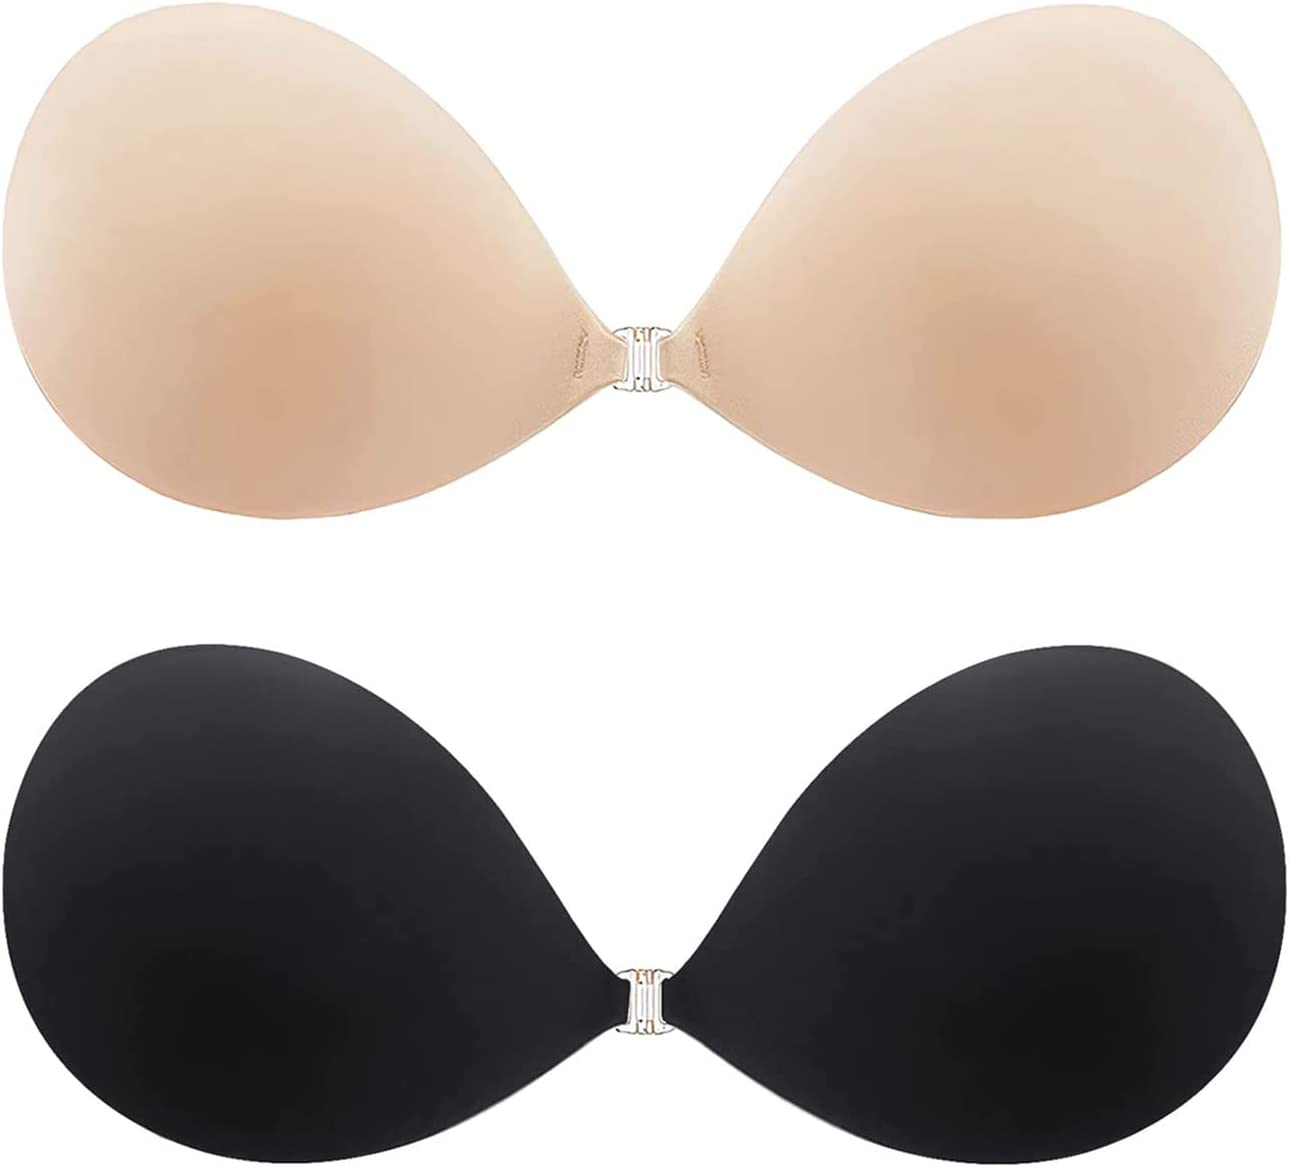 Adhesive Bra Push Up Strapless Invisible Sticky Bra Reusable Backless  Silicone Bra for Women